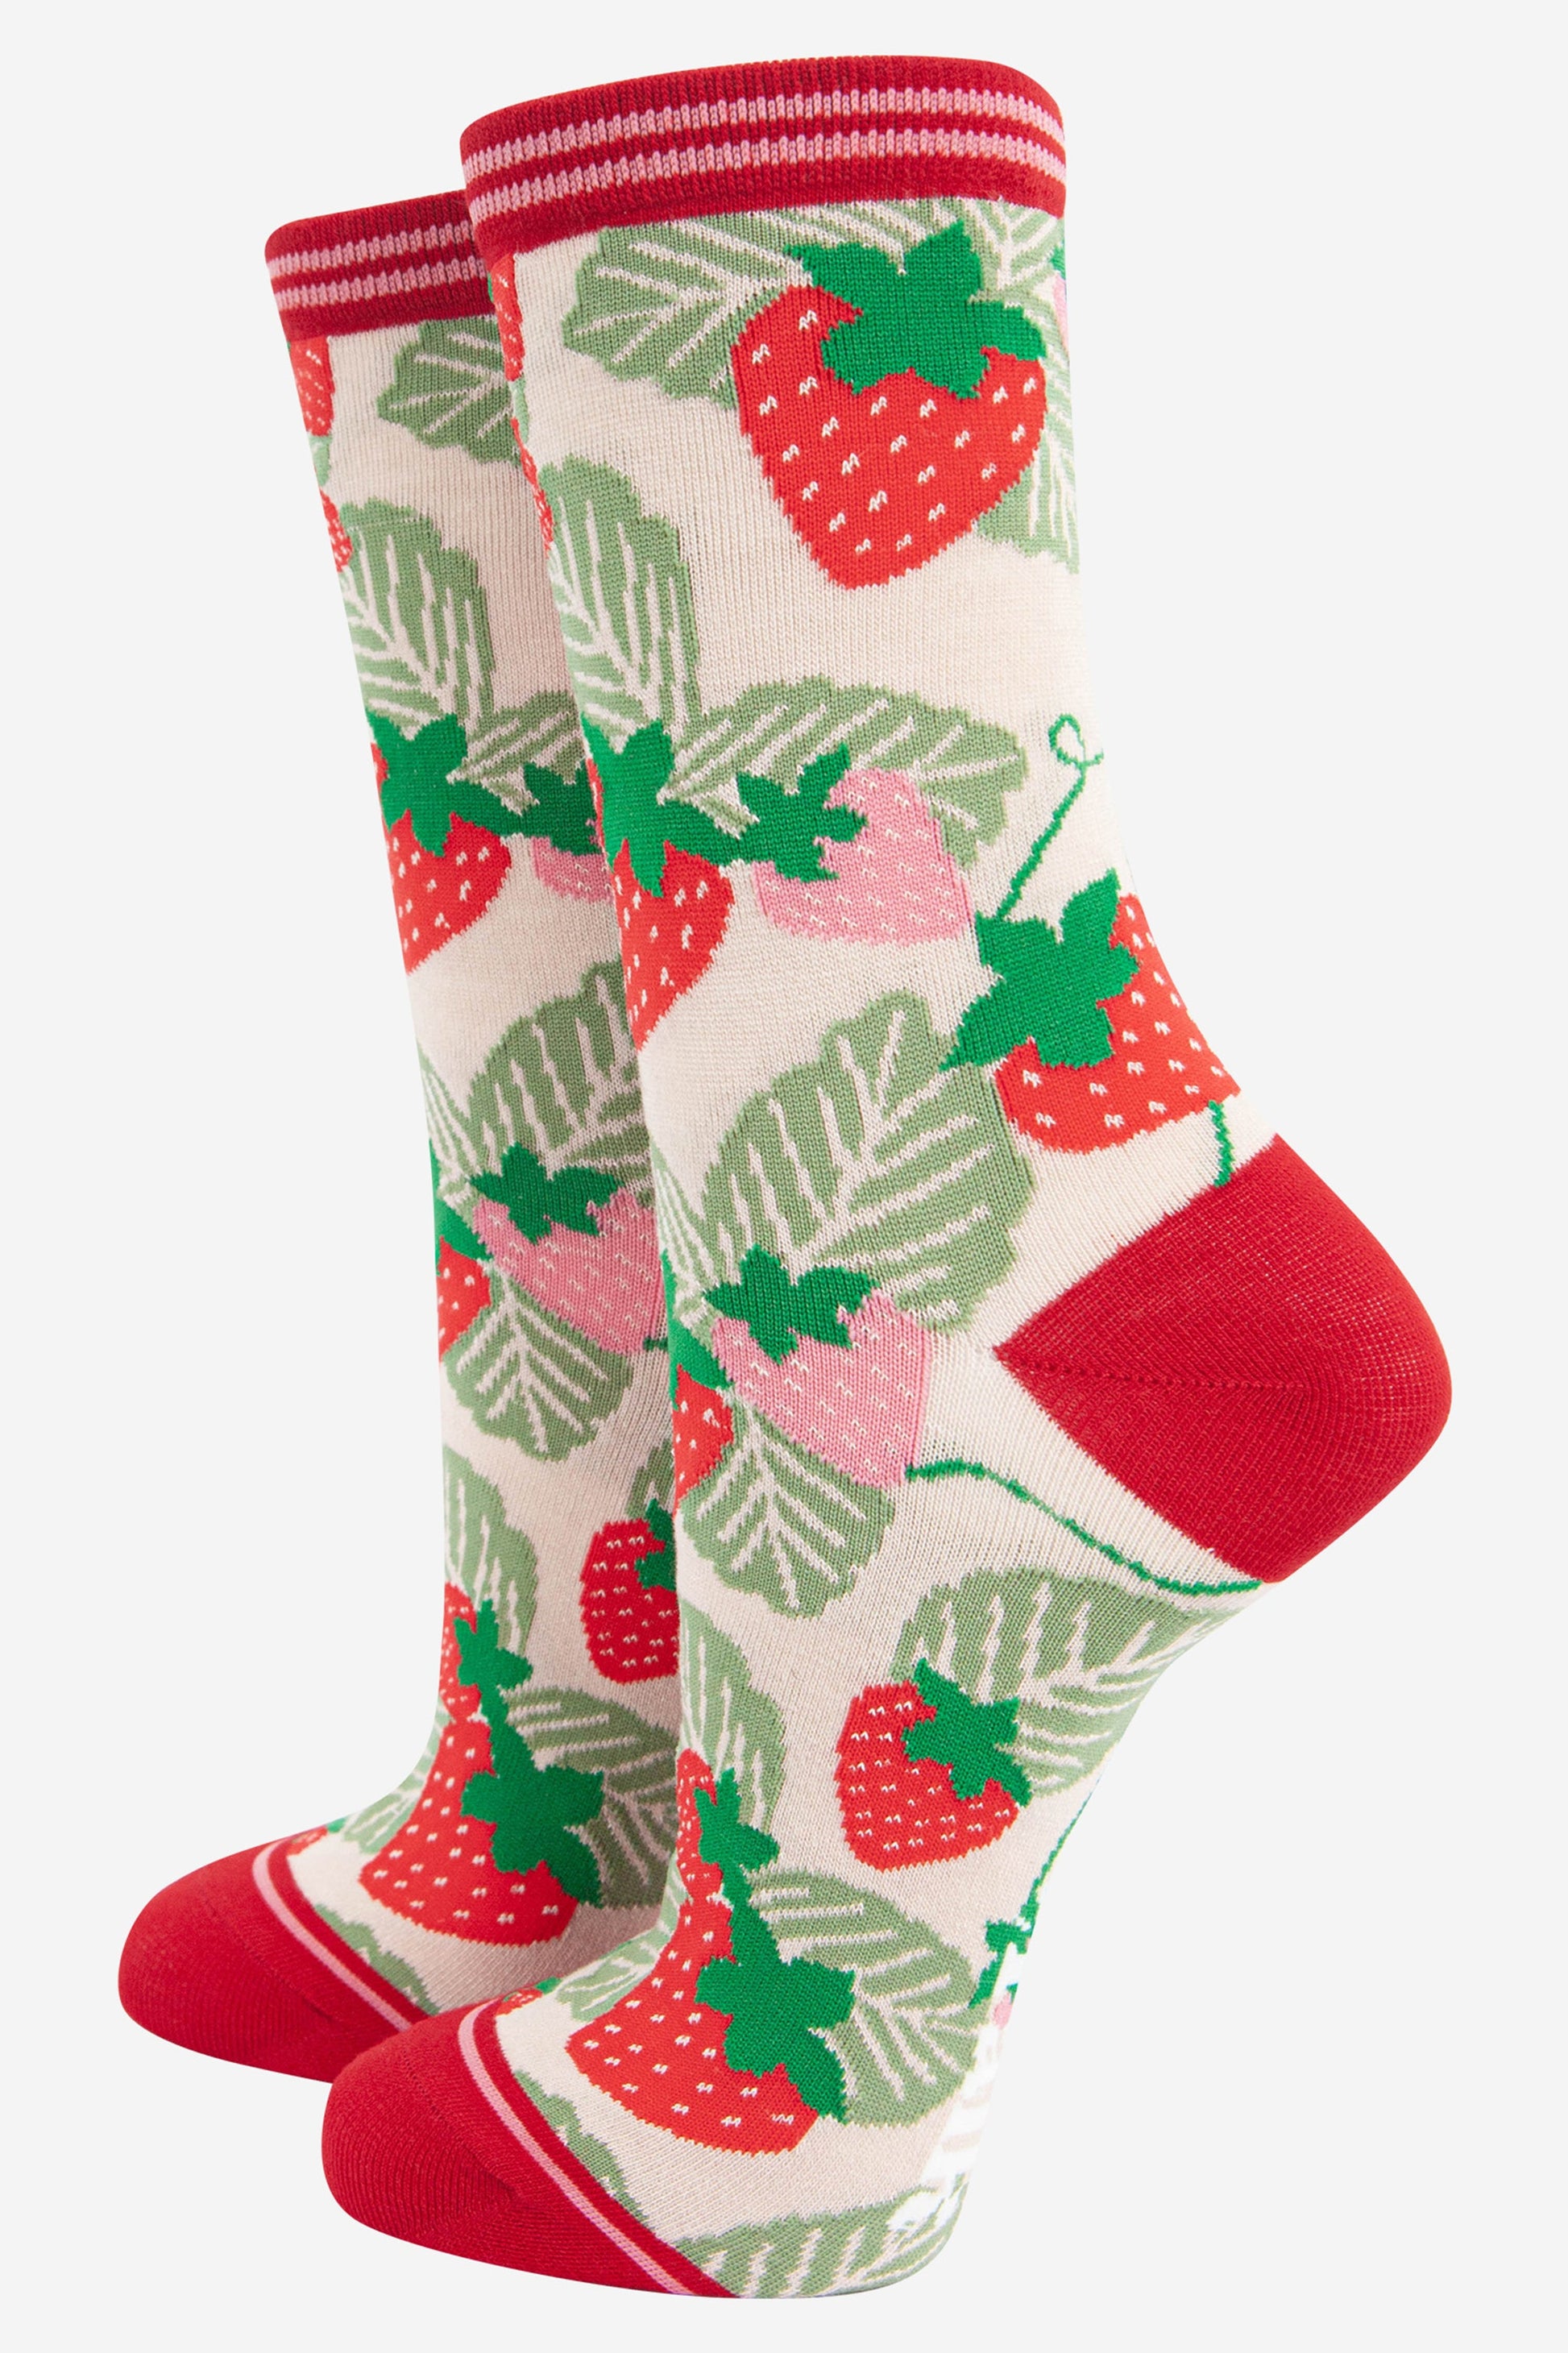 cream and red bamboo ankle socks with an all over pattern of red and green strawberries and leaves